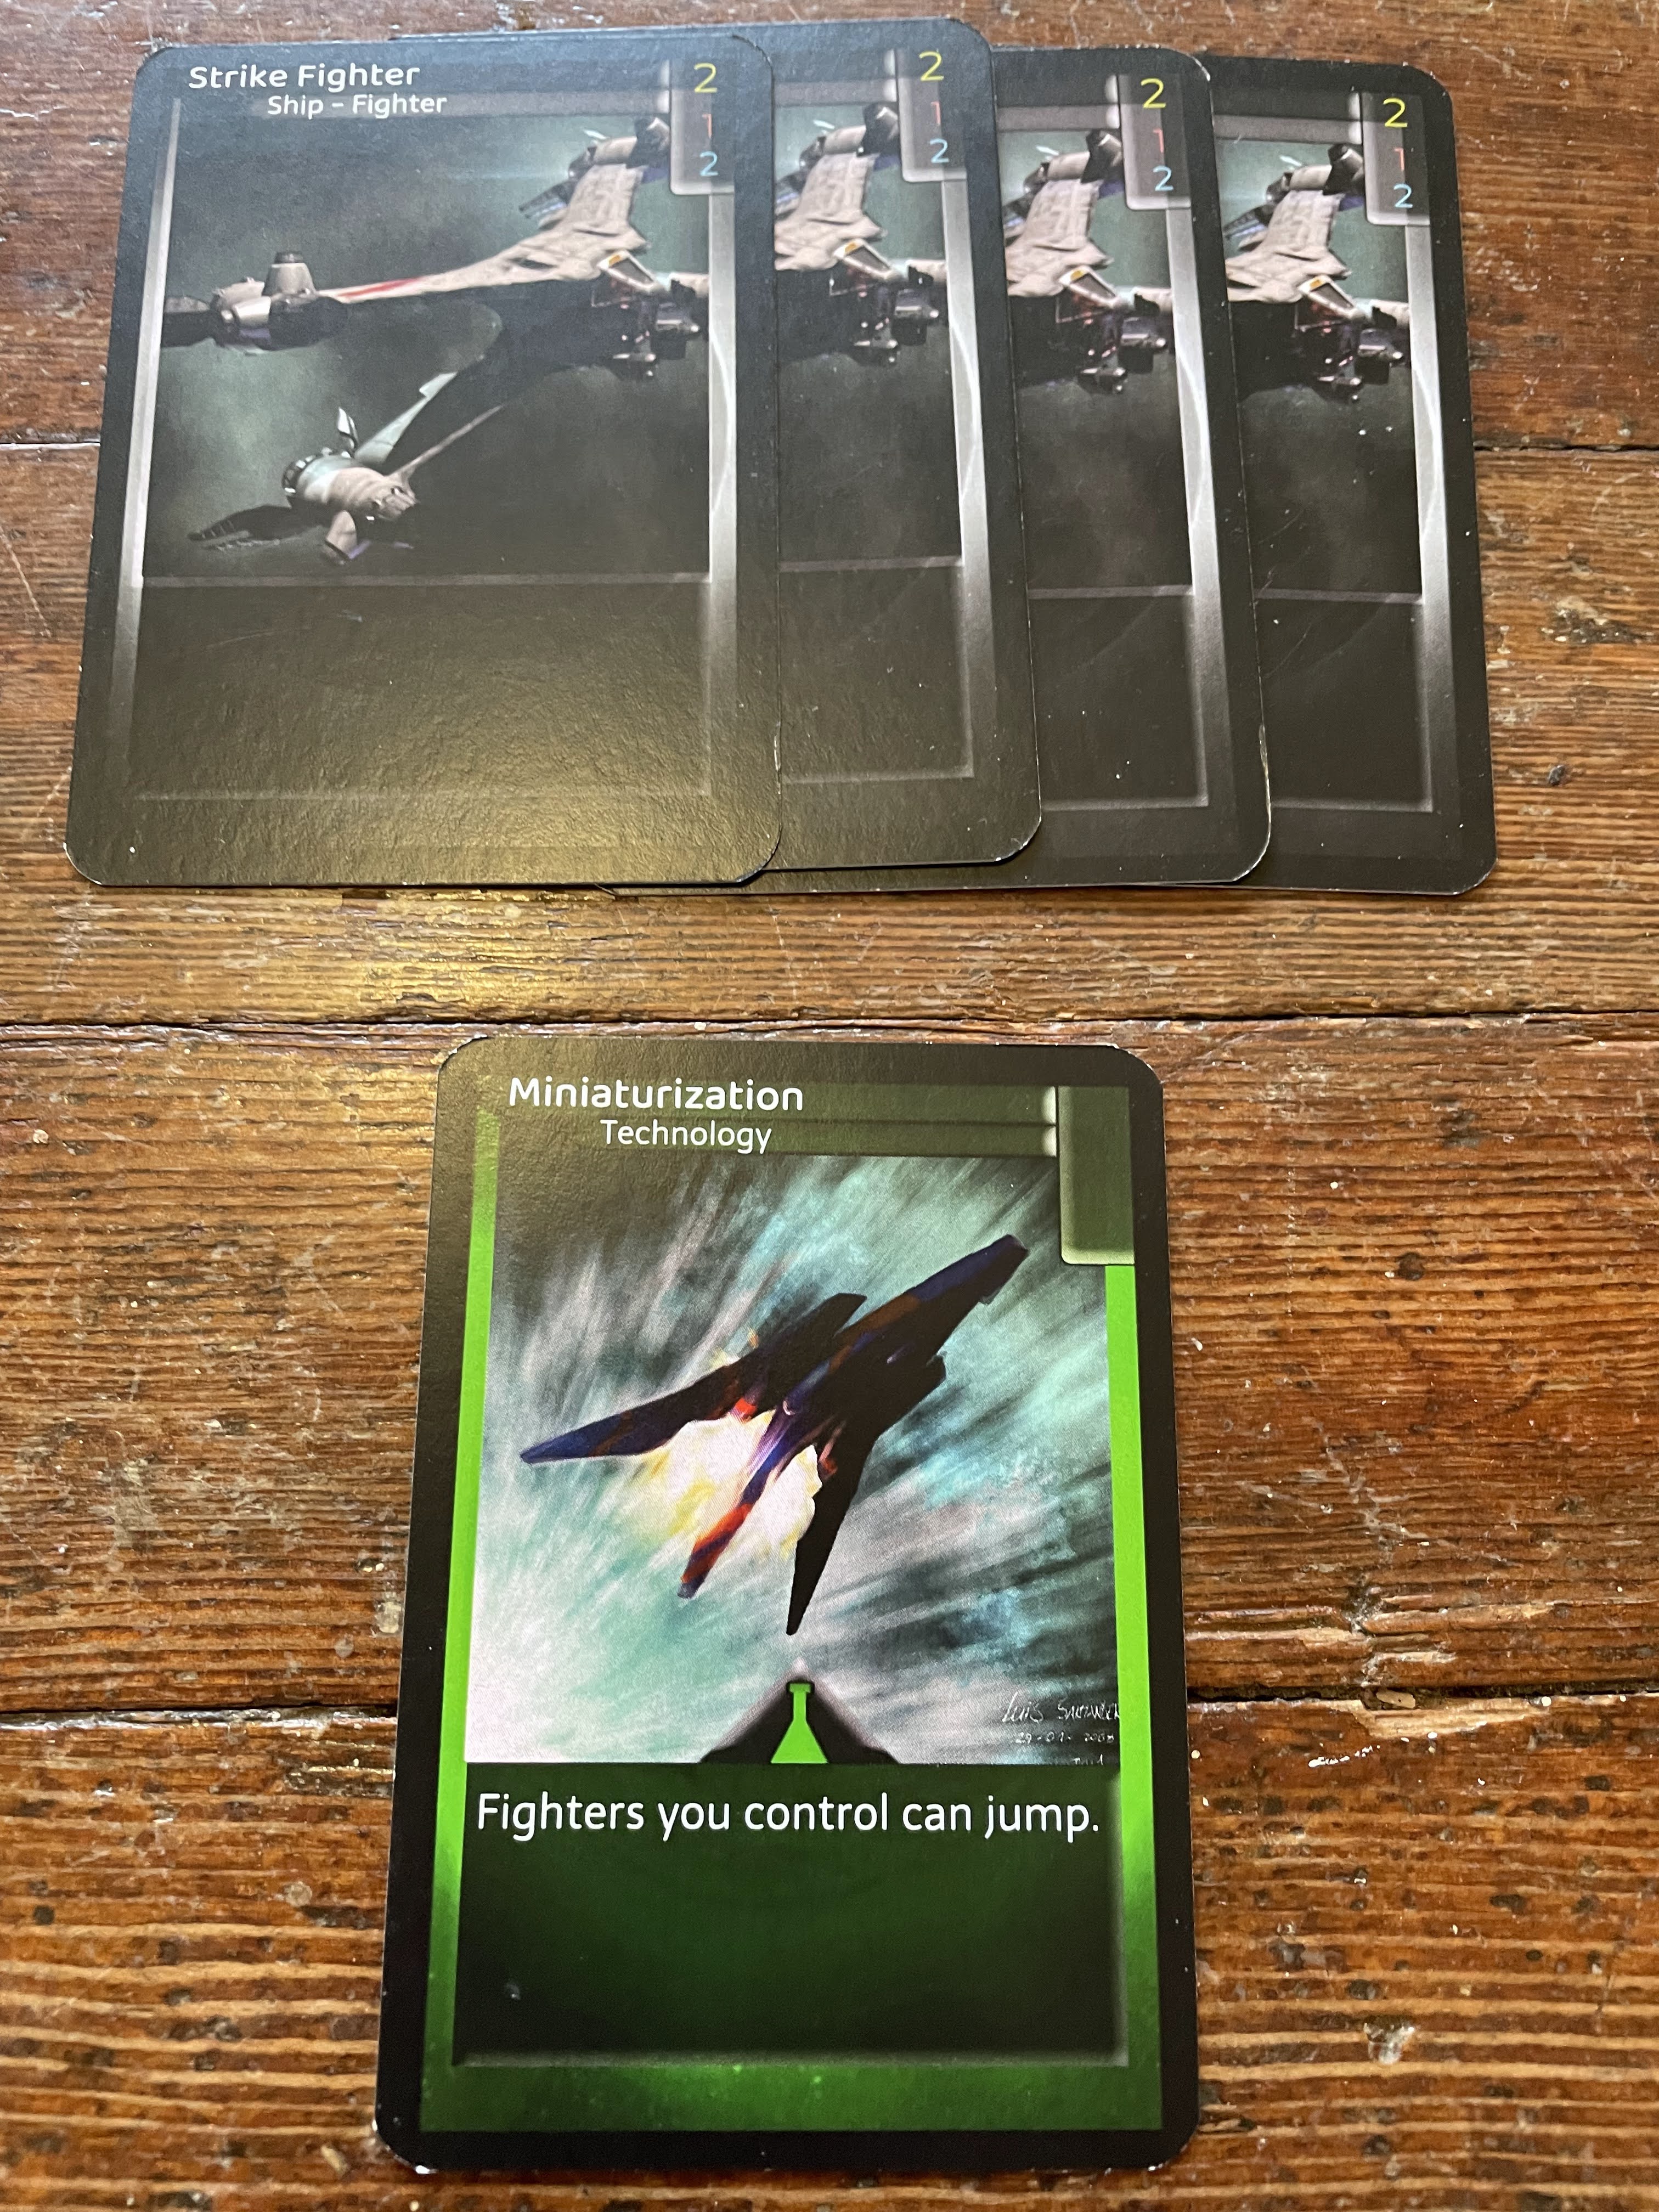 Miniaturization, a Science card, is placed beneath the four fighters.